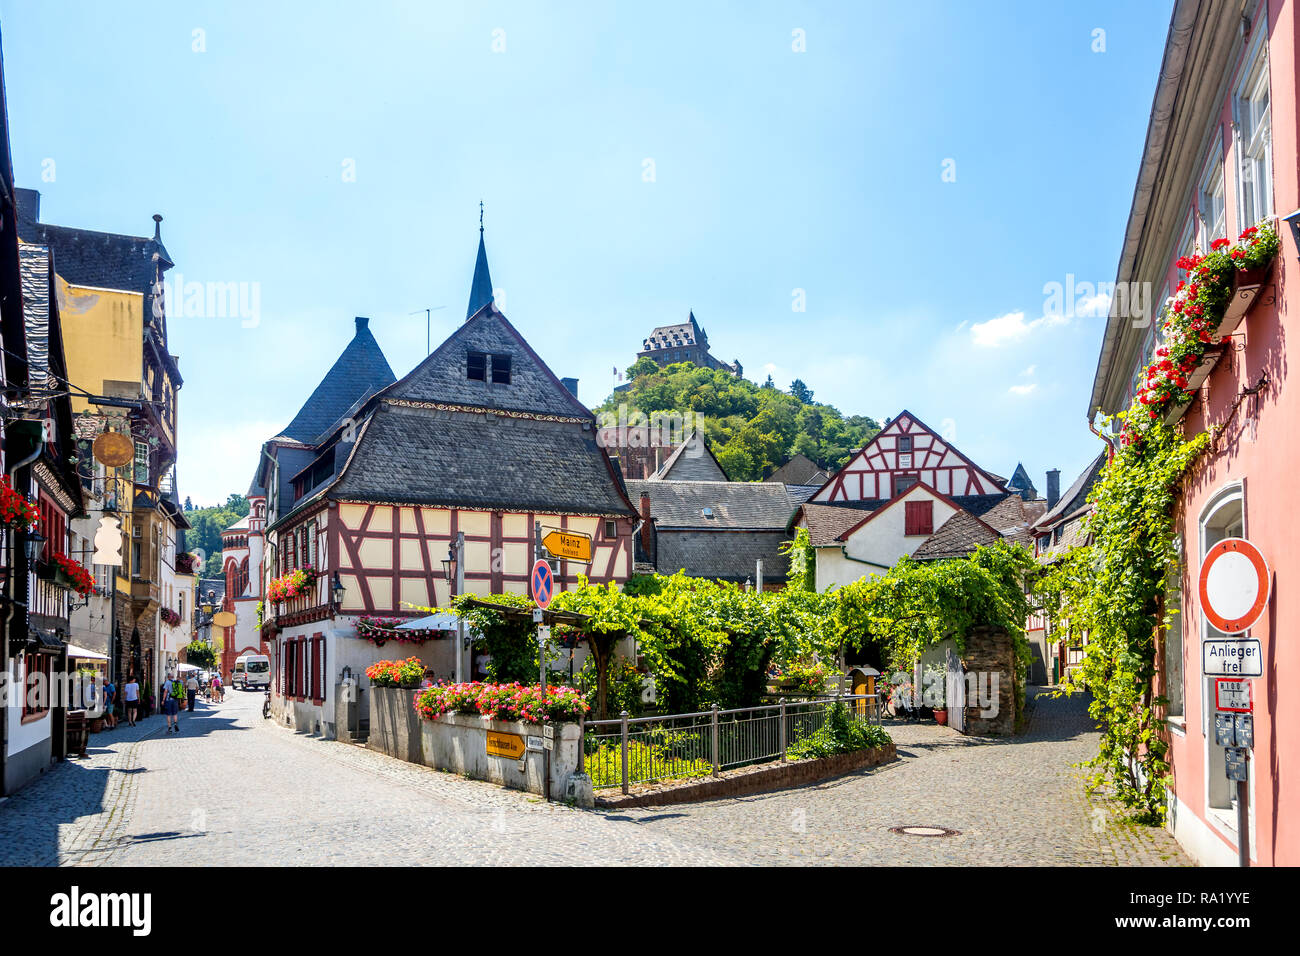 Bacharch, Historical City, Rhine Valley, Germany Stock Photo